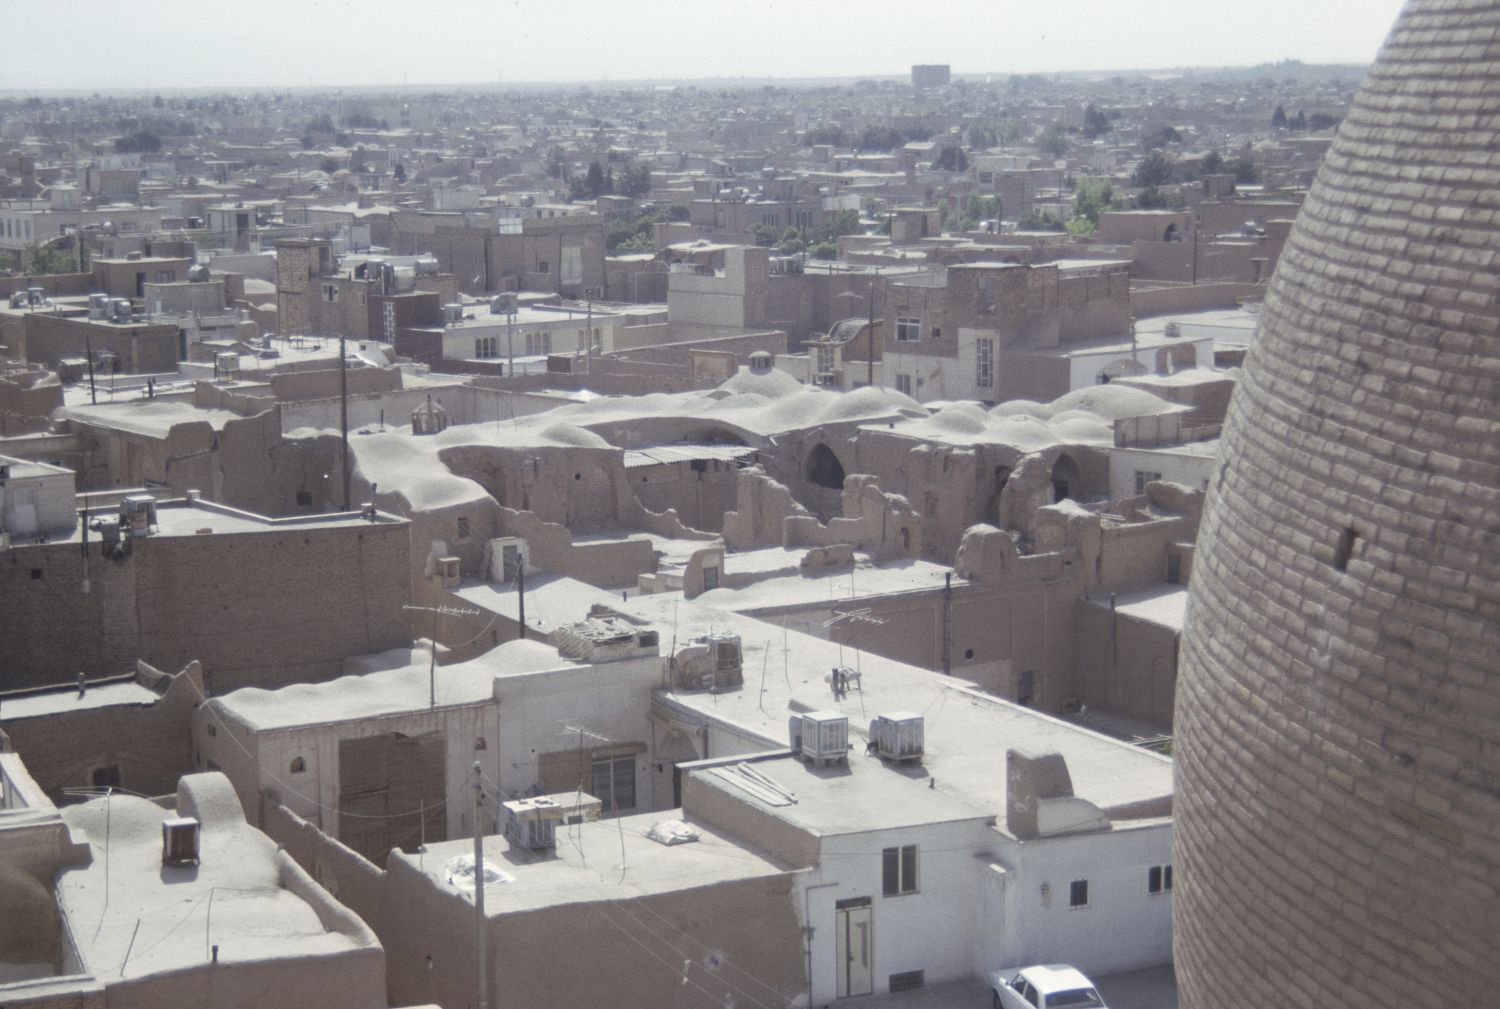 View over city of Kashan facing southwest. Photo taken from the roof of the&nbsp;<a href="https://archnet.org/sites/1625" target="_blank" data-bypass="true">Aqa Buzurg Mosque</a>.